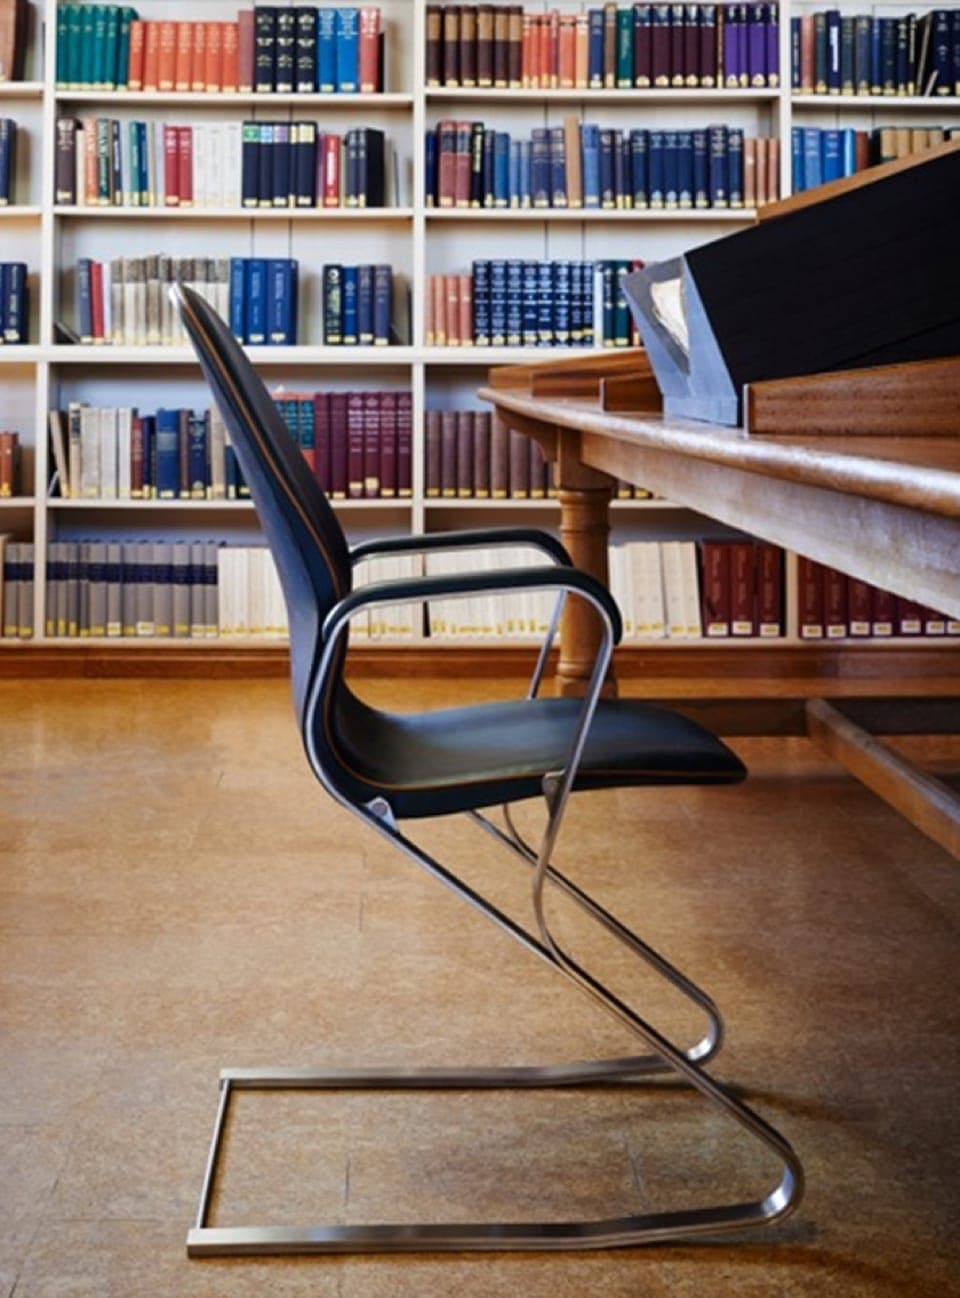 Shaped steel chair in library